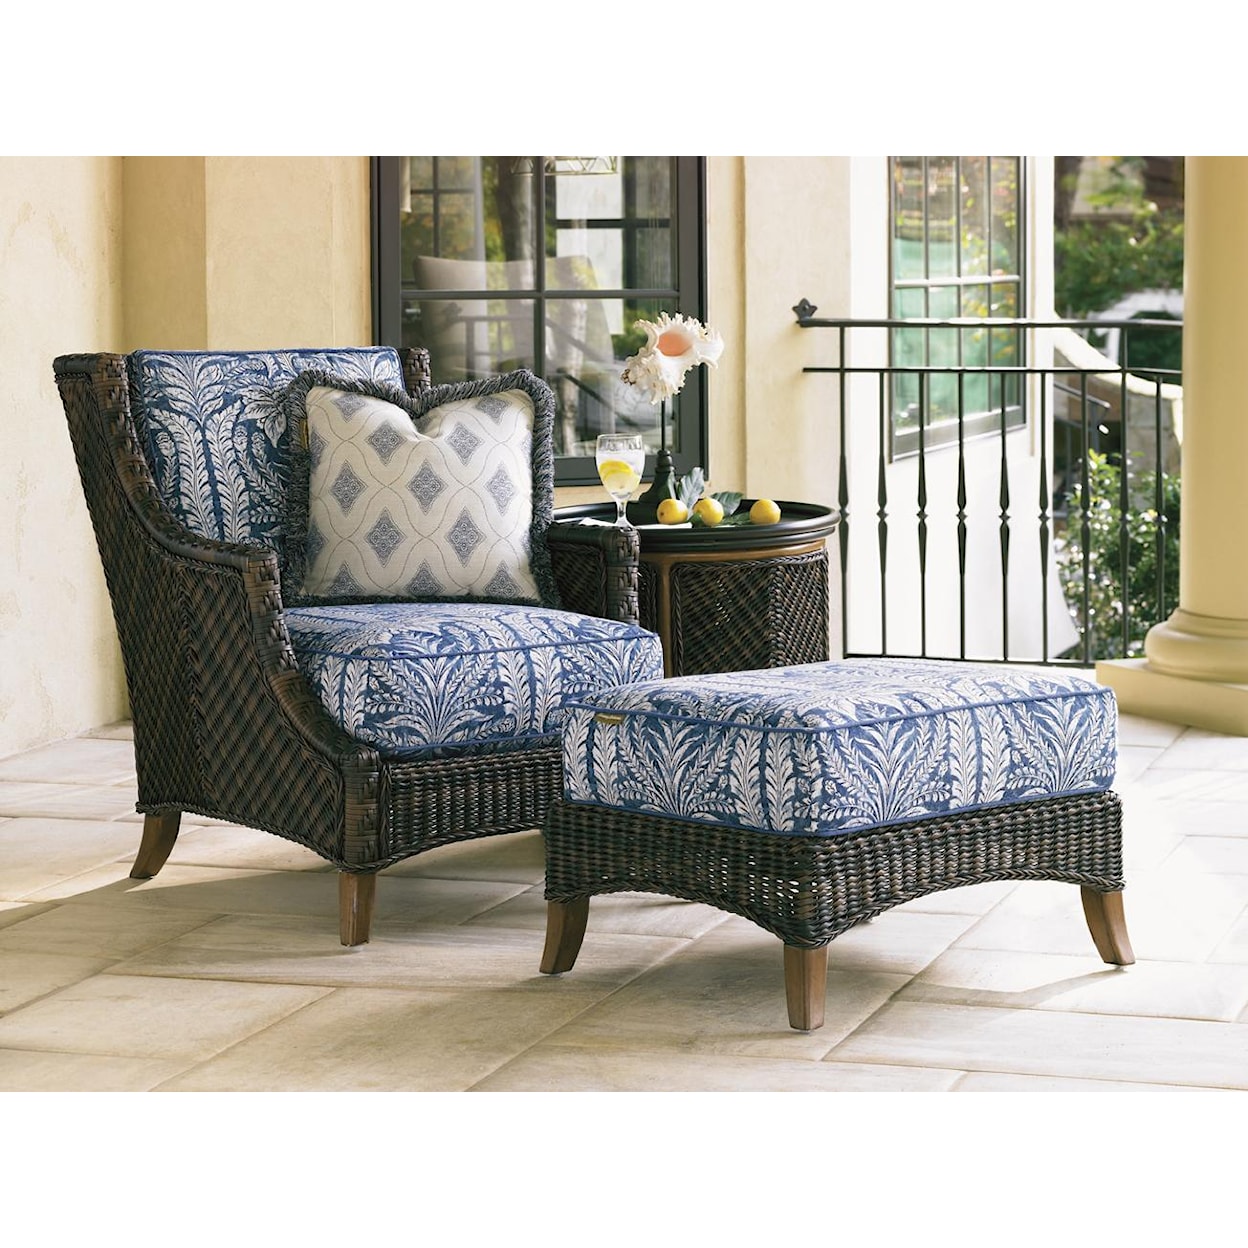 Tommy Bahama Outdoor Living Island Estate Lanai Outdoor Lounge Chair